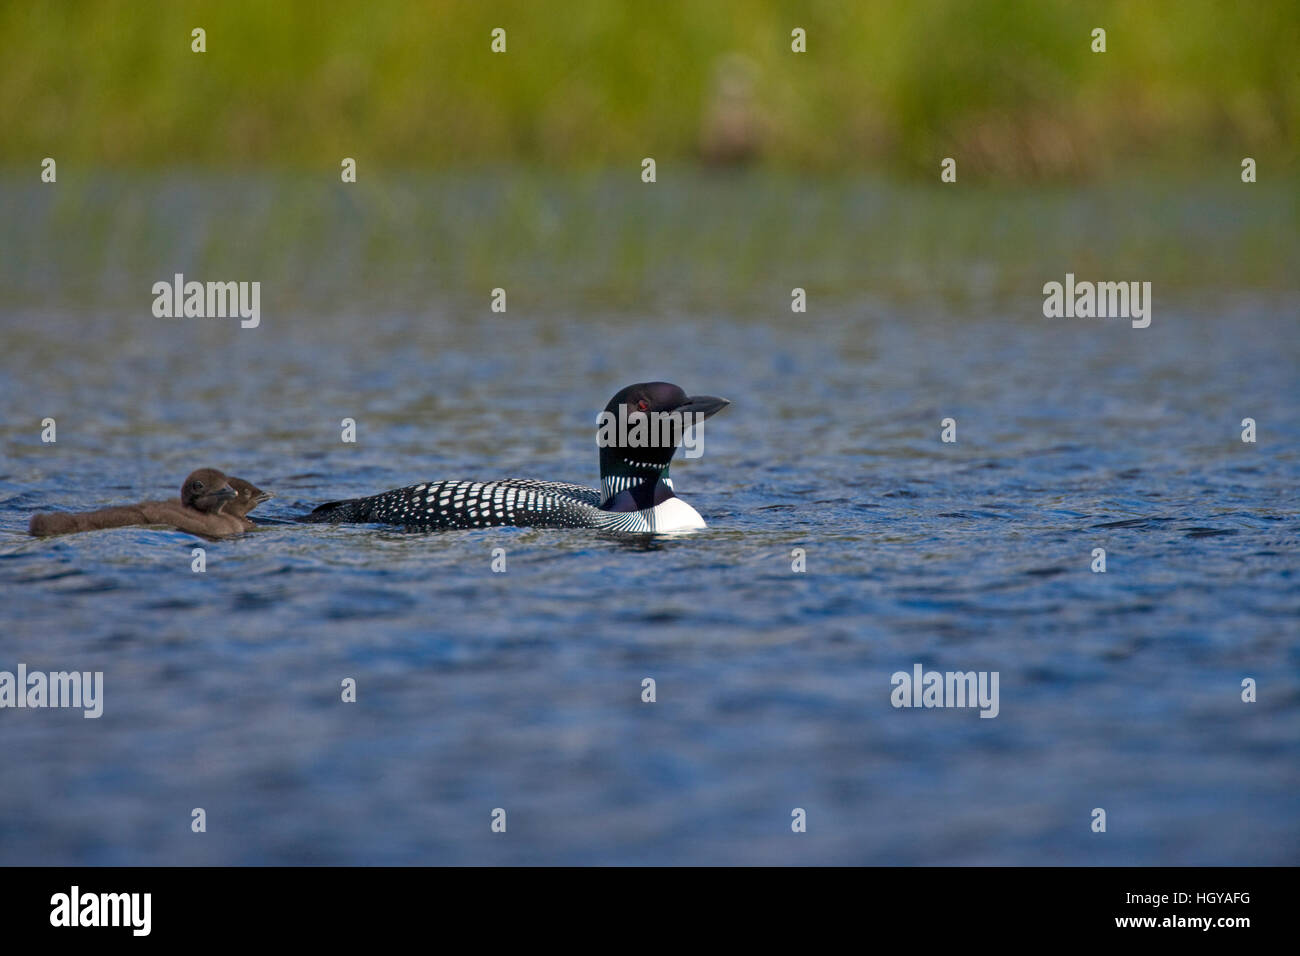 A common loon, Gavia immer, with two chicks on East Inlet in Pittsburg, New Hampshire.  A pond upstream of Second Connecticut Lake. Stock Photo